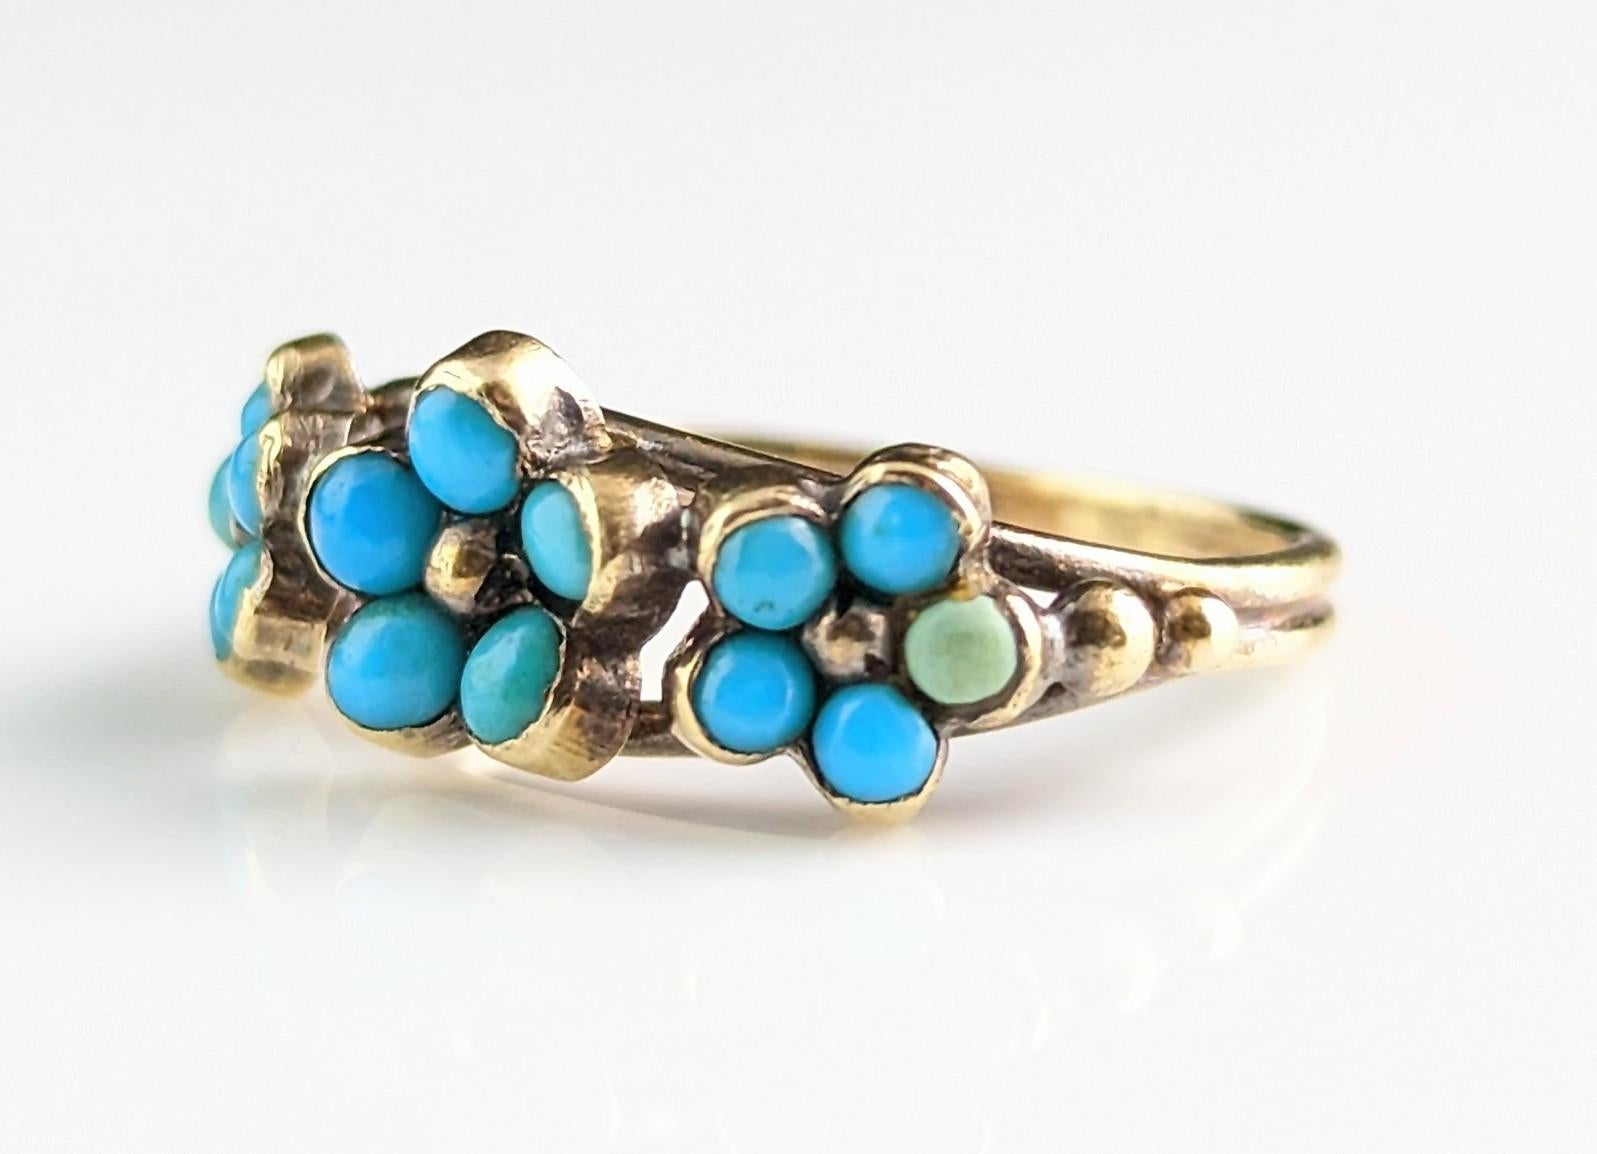 Antique Georgian Triple Flower Ring, Forget Me Not, 18k Gold and Turquoise 8